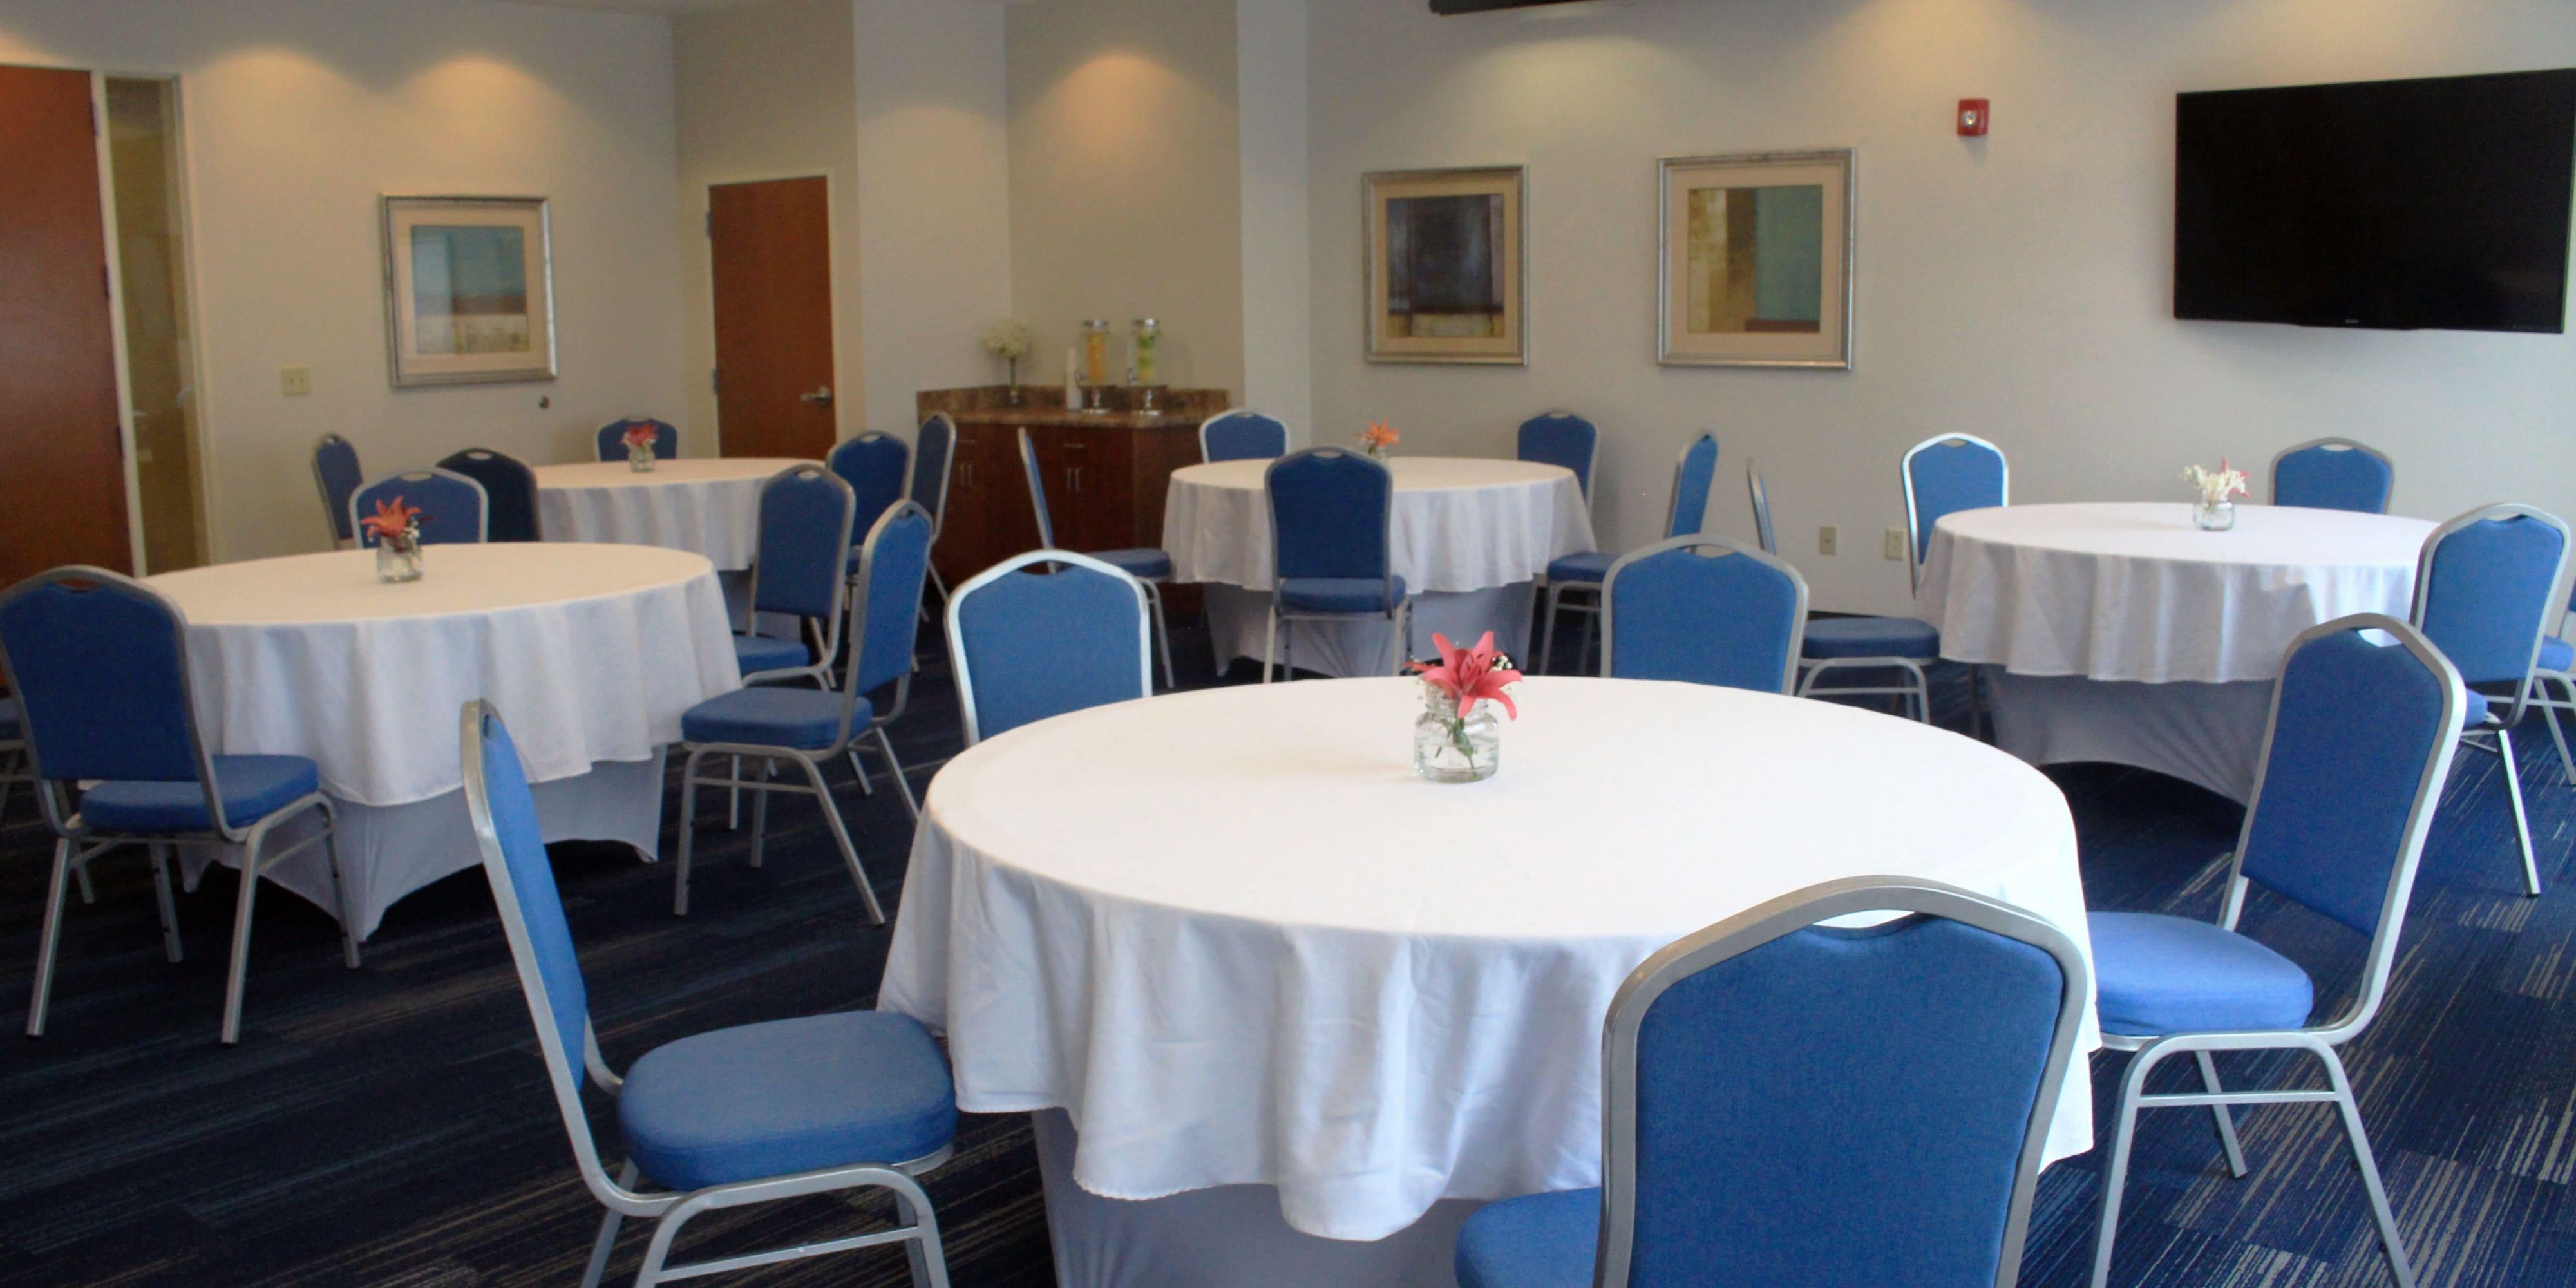 When you are ready to plan your next meeting or group event, you can book with confidence with our new flexible meeting offer. We're committed to high levels of cleanliness. That means clean, clutter free event space and an experience that supports the well-being of your attendees with flexible re-scheduling or cancellation, if needed.